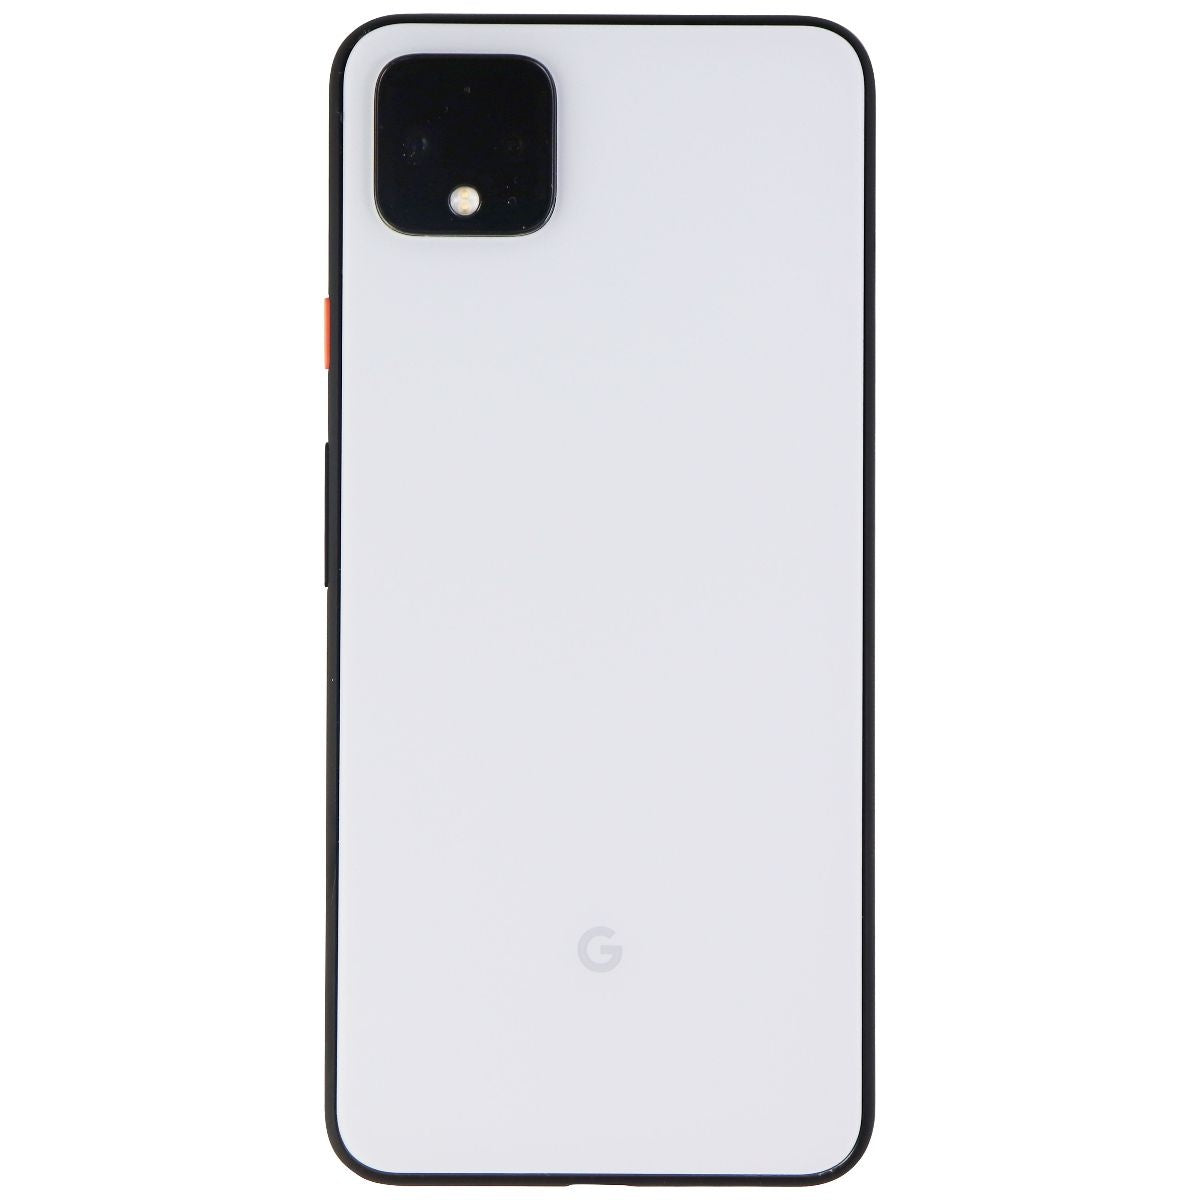 Google Pixel 4 XL (6.3-in) Smartphone (G020J) GSM + CDMA - 128GB / Clearly White Cell Phones & Smartphones Google    - Simple Cell Bulk Wholesale Pricing - USA Seller